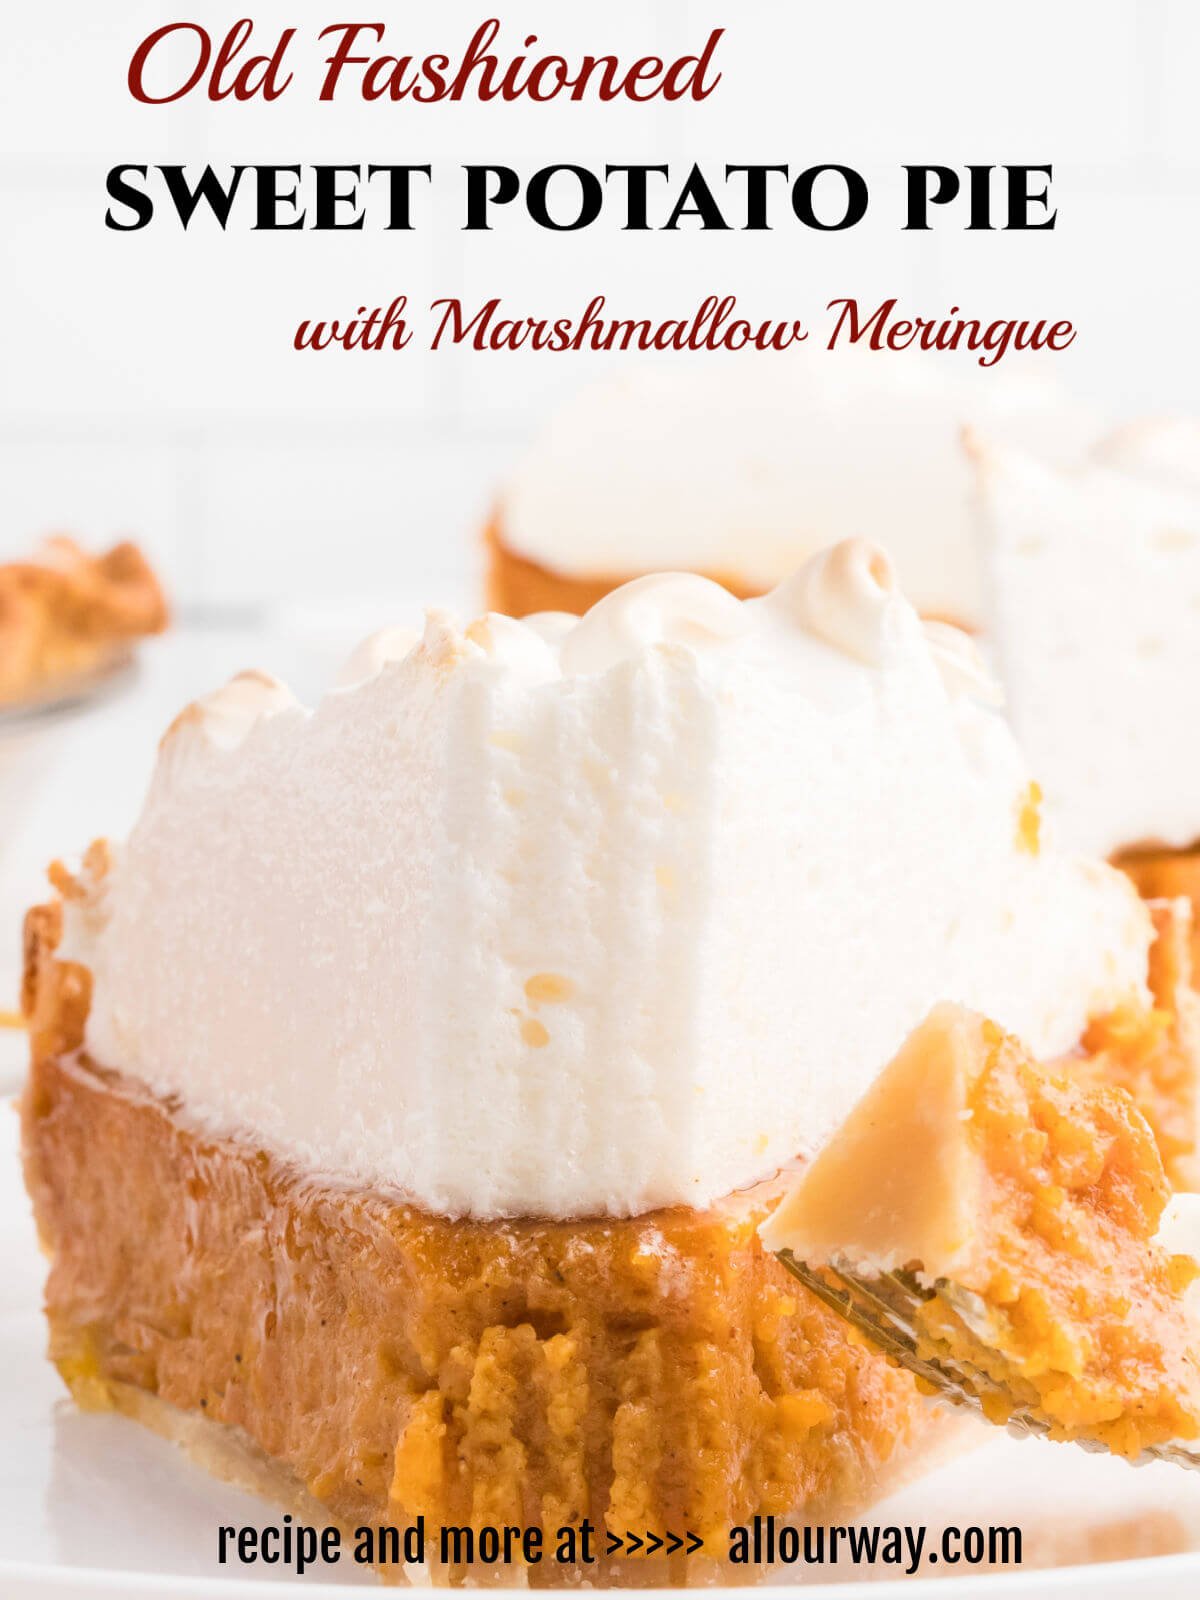 This Sweet Potato Pie recipe is everything you could want in a holiday dessert. The filling is creamy and flavorful, while the marshmallow meringue topping is light and fluffy. Plus, it's all on top of a flaky pie crust that is just like Grandma used to make.